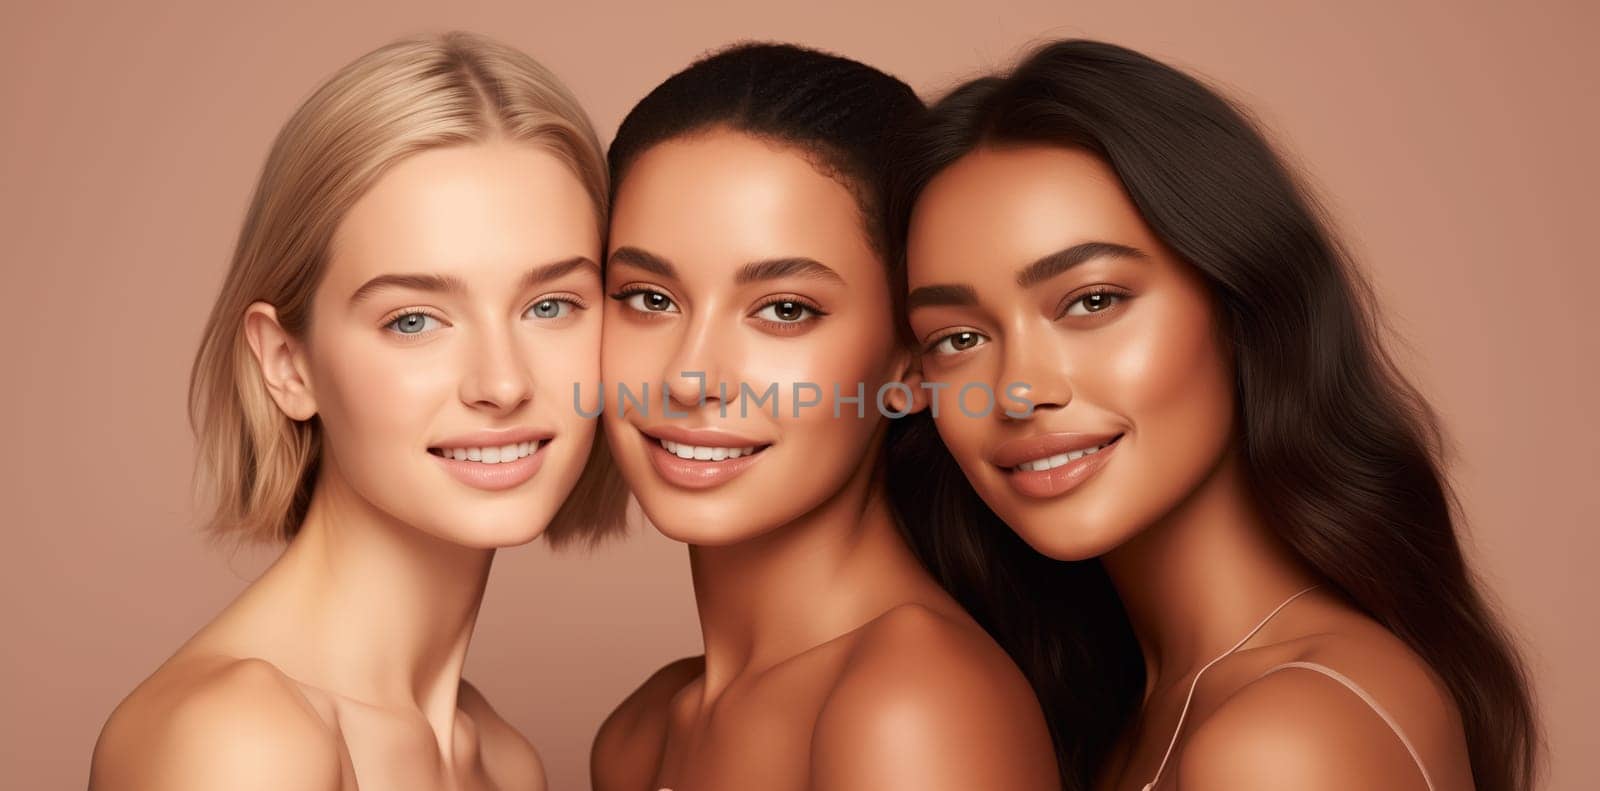 Beauty portrait of three diverse young women with clean healthy skin, beautiful lovely female models posing together on studio background